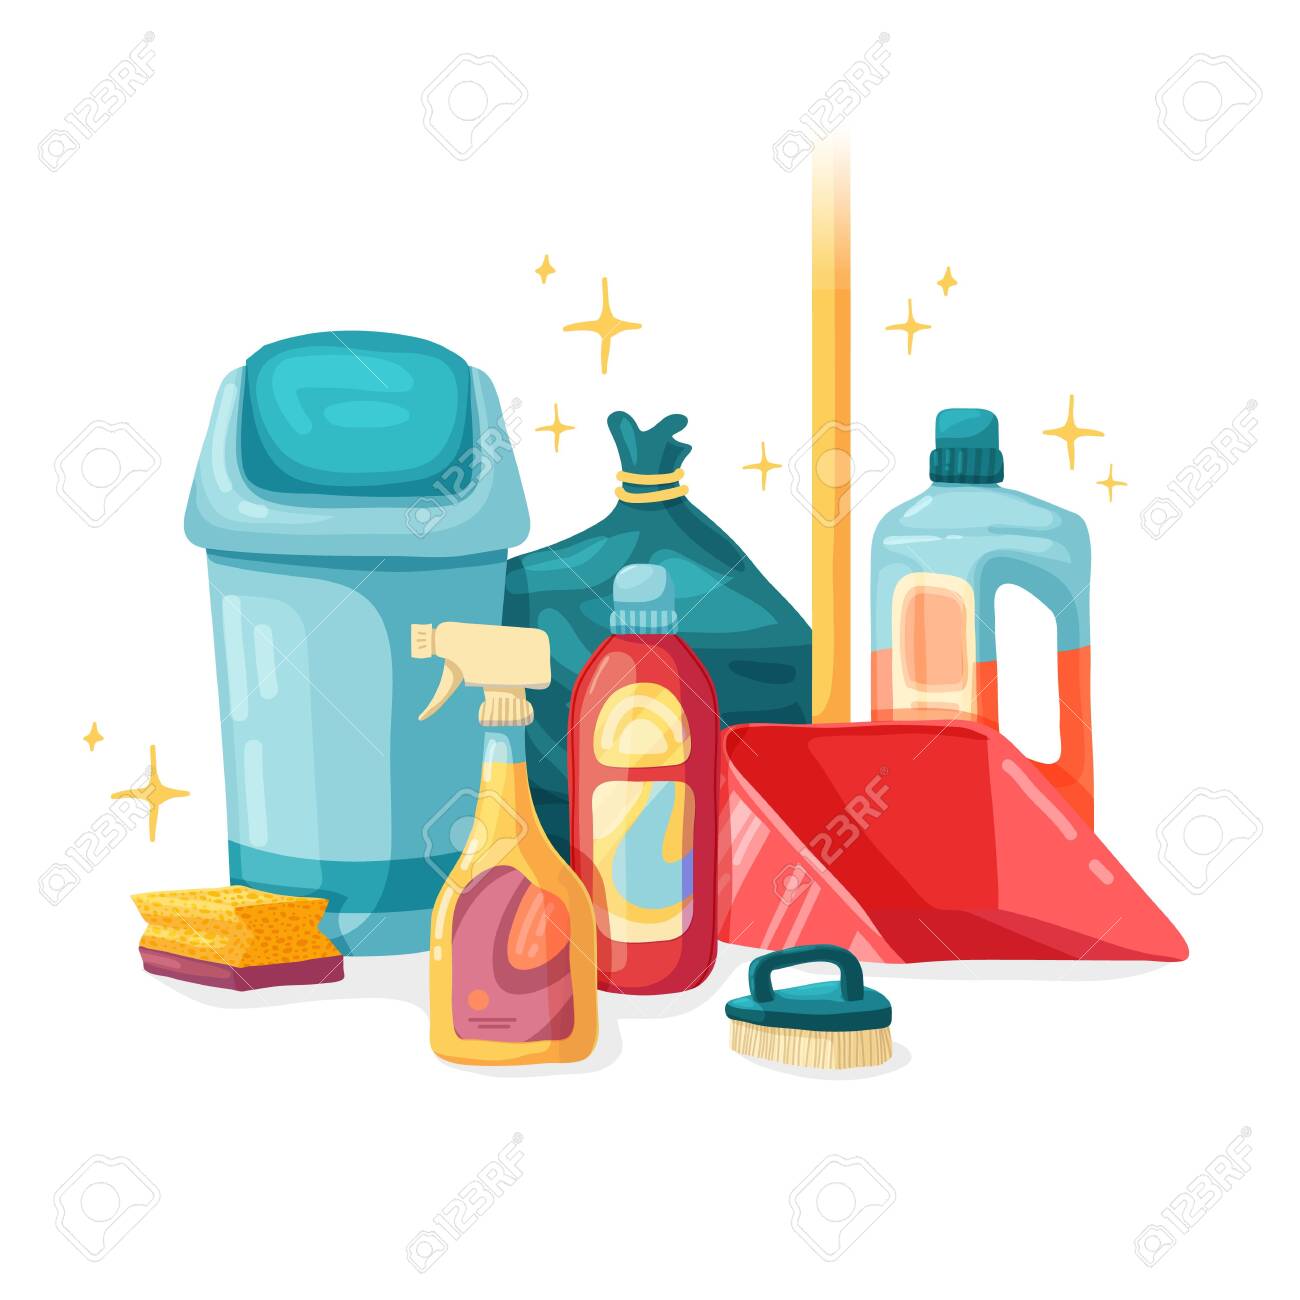 Design banner House cleaning with cleaning products. Cartoon illustration household chemicals. Temlate for flyer clean up service. Vector